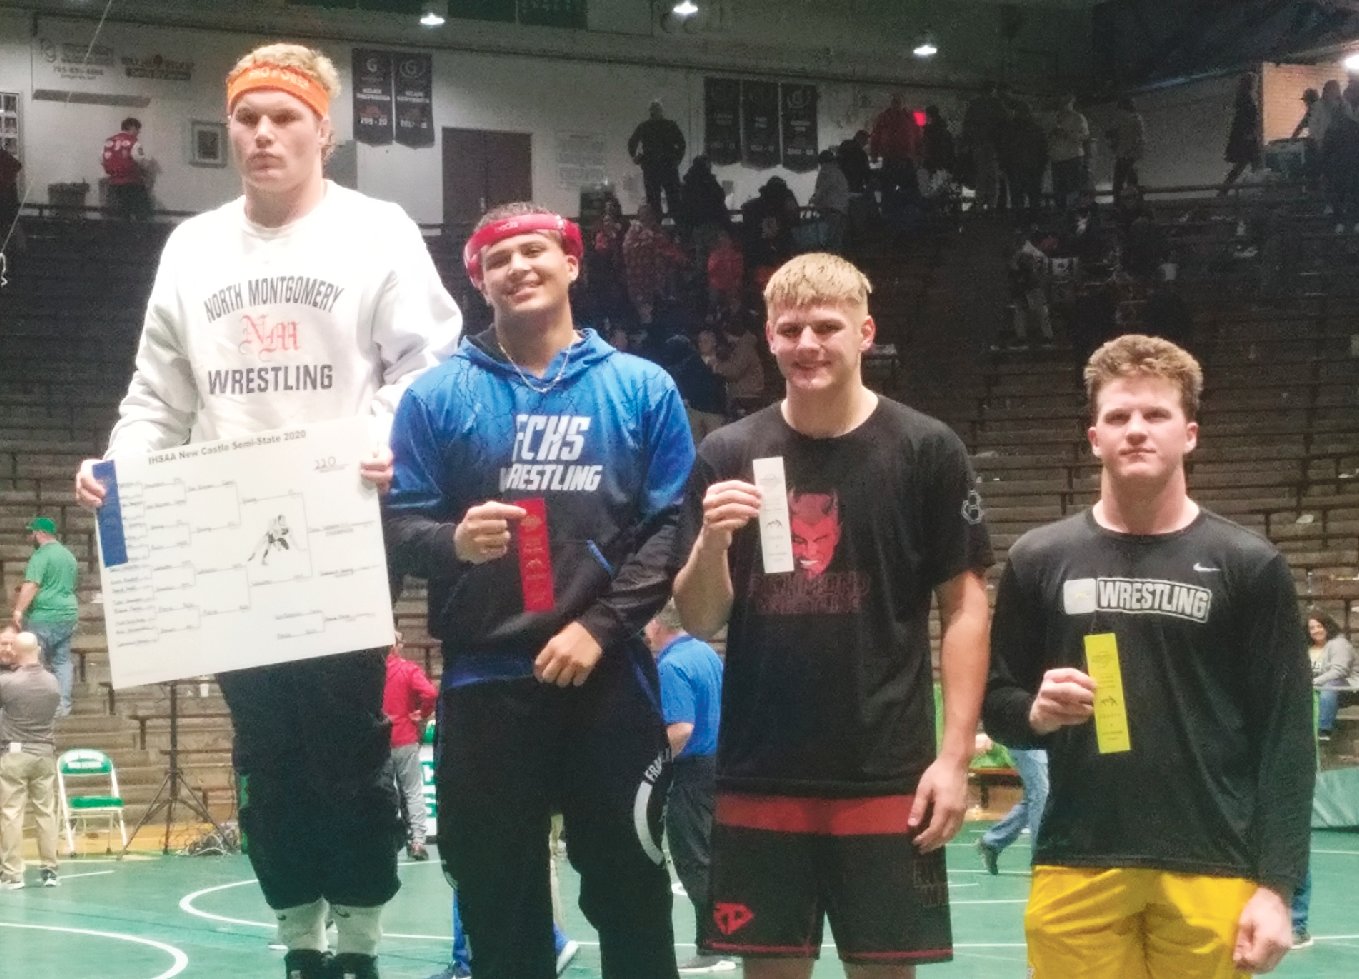 North Montgomery's Drew Webster stood atop the podium for a second-straight year at the New Castle wrestling semi-state on Saturday.